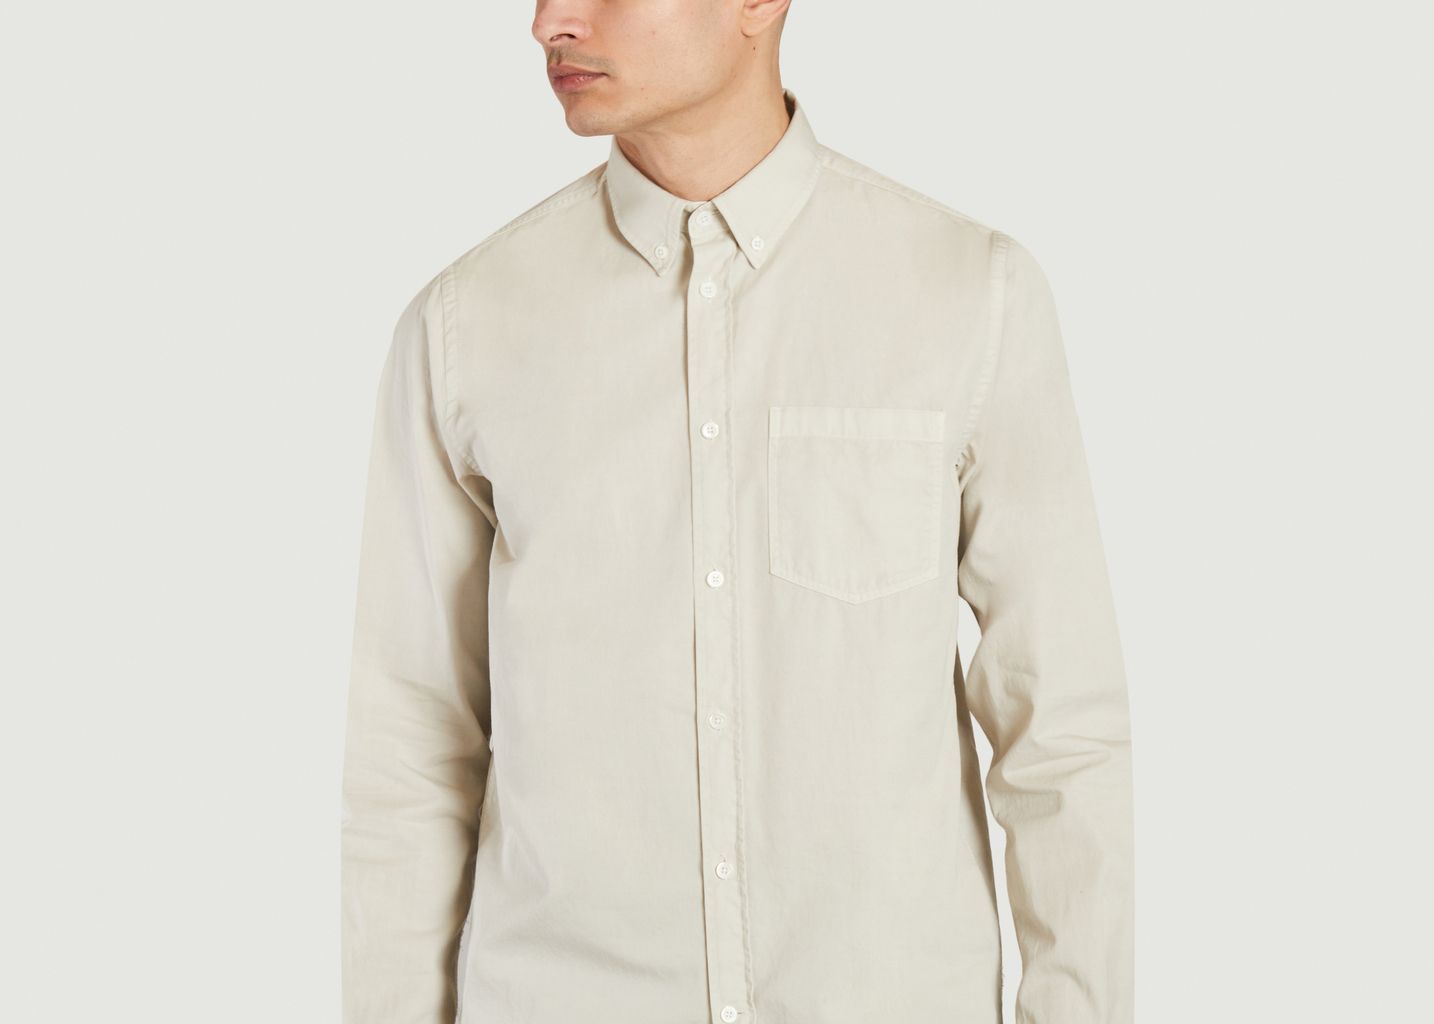 Anton Light Twill shirt - Norse Projects